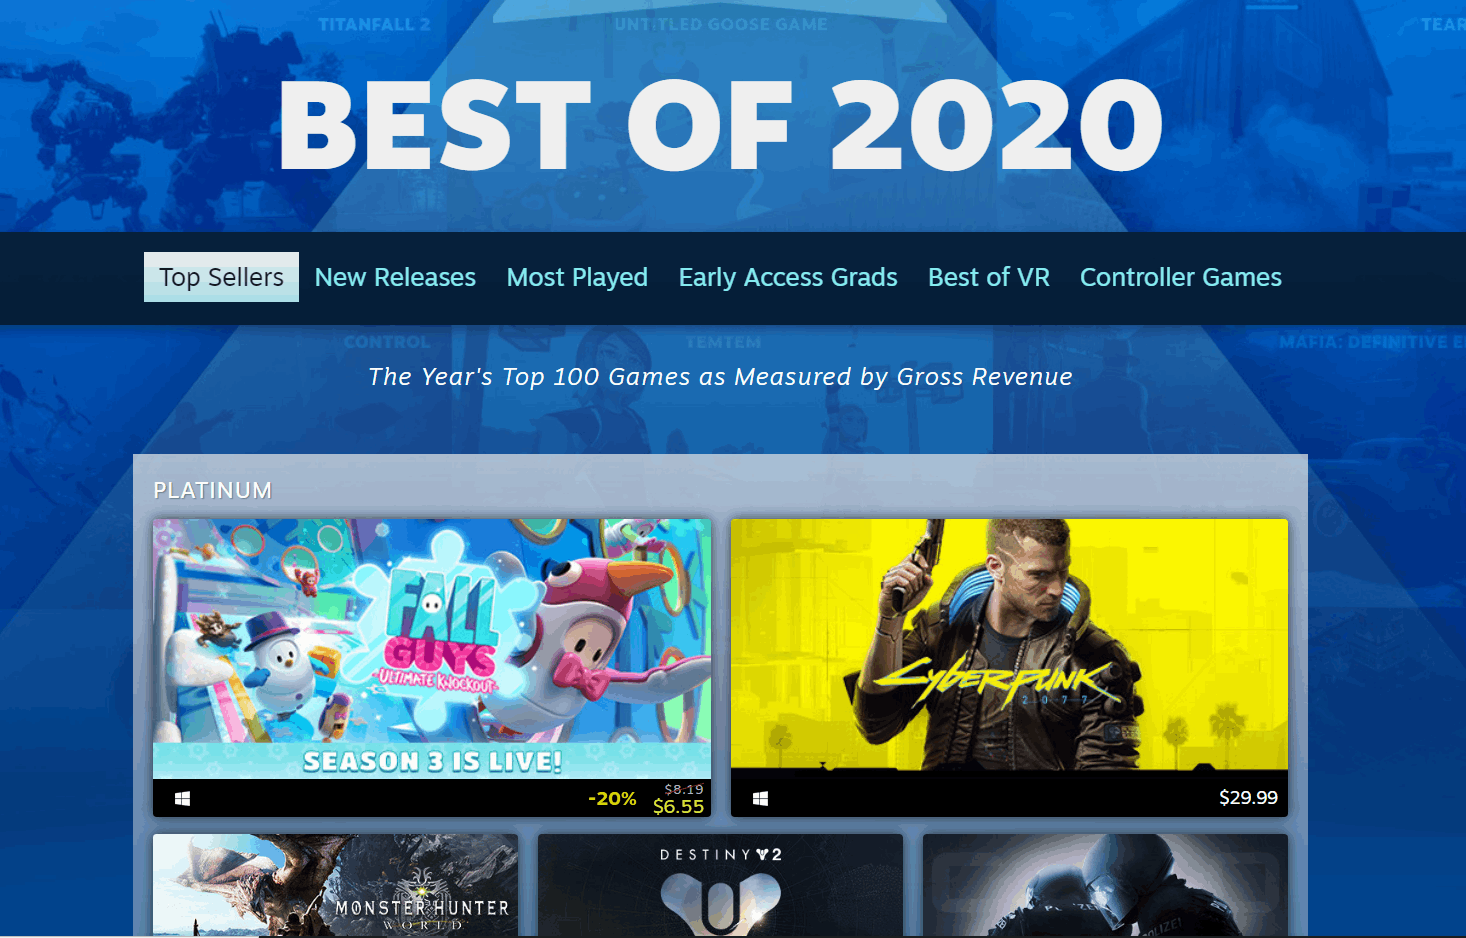 Steam Best of 2020 list includes video games like Cyberpunk 2077, Among Us,  PUBG, and more